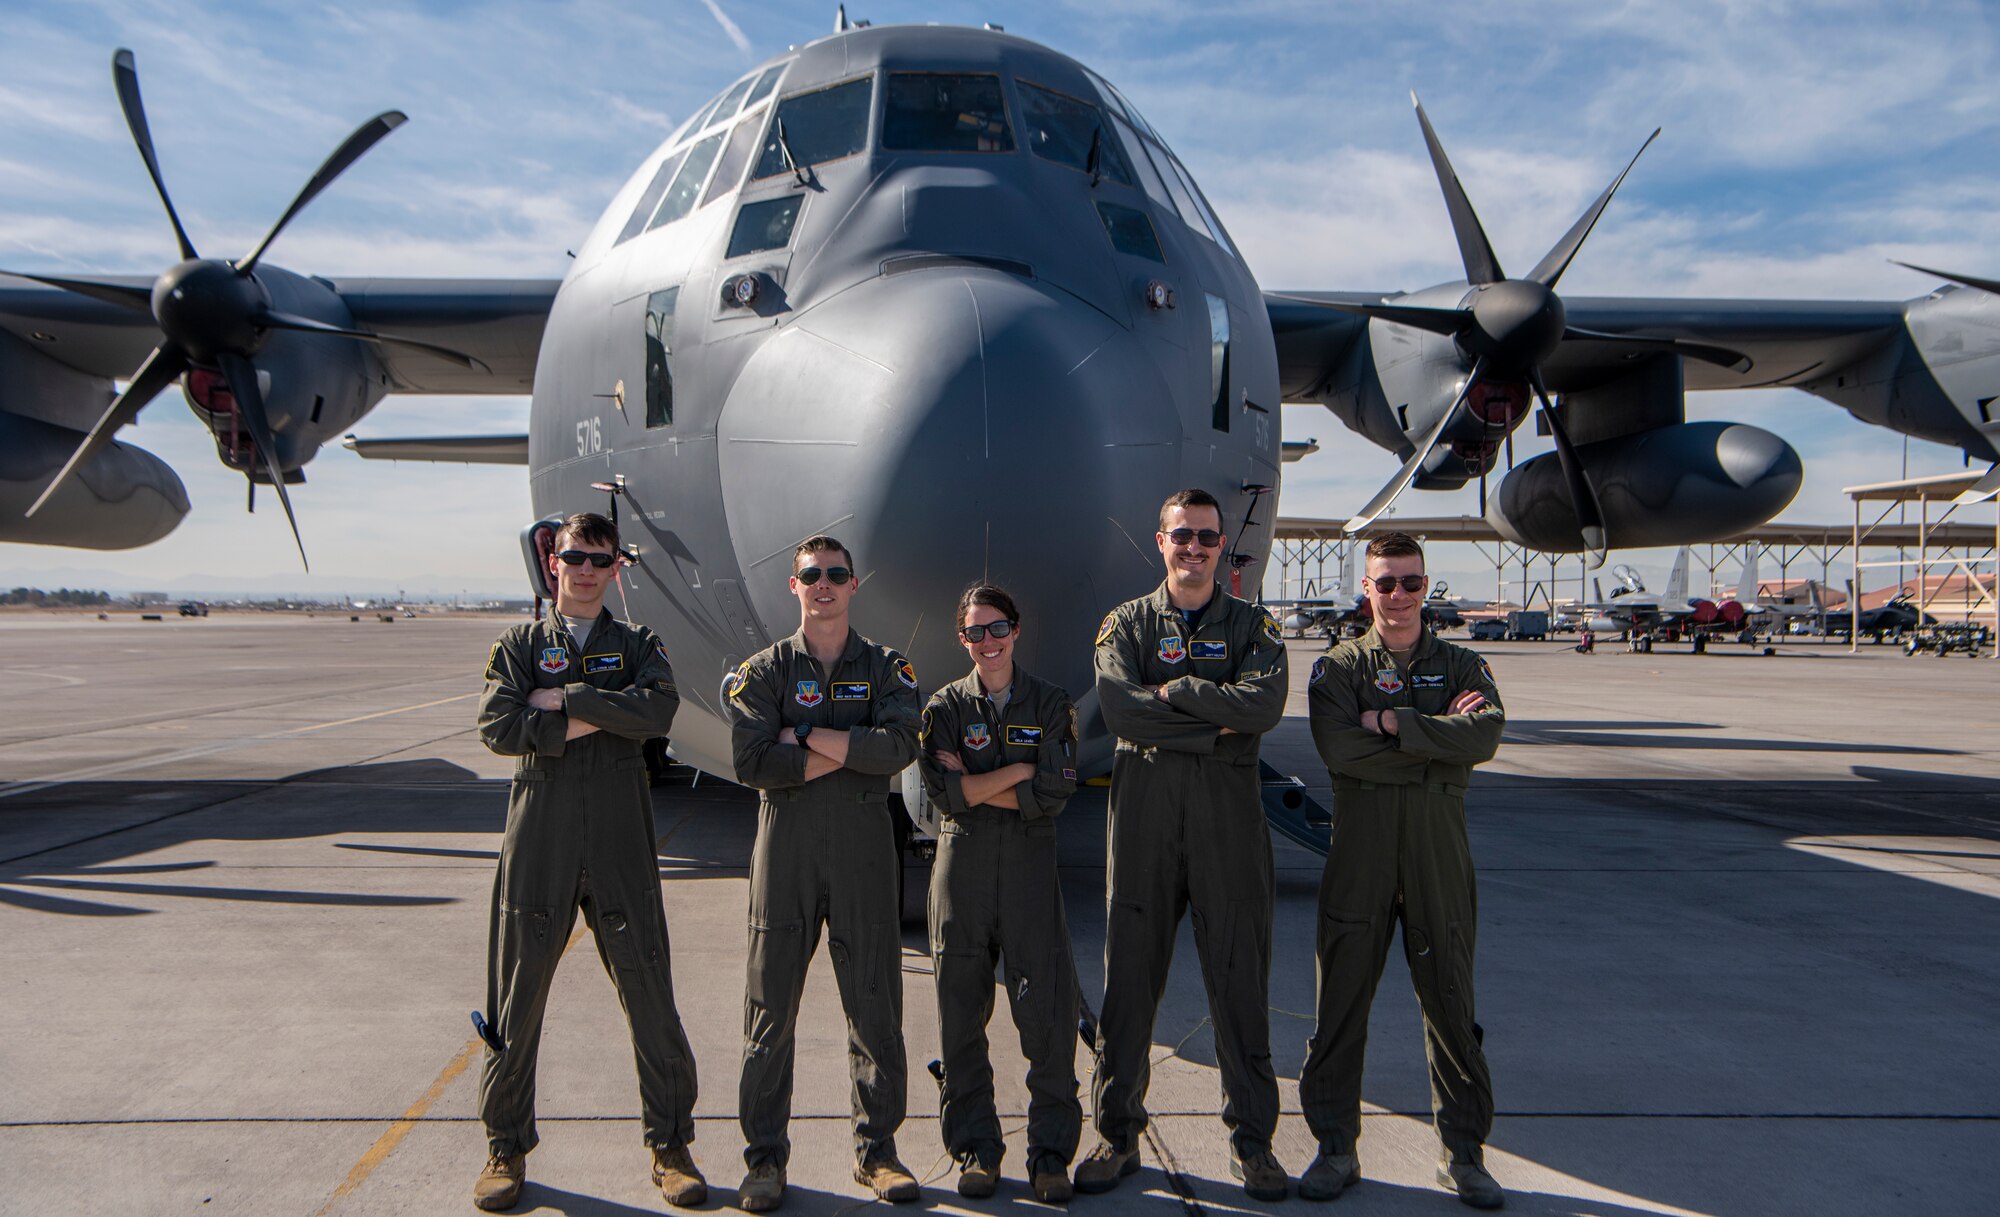 Five Airmen stand in front of aircraft.